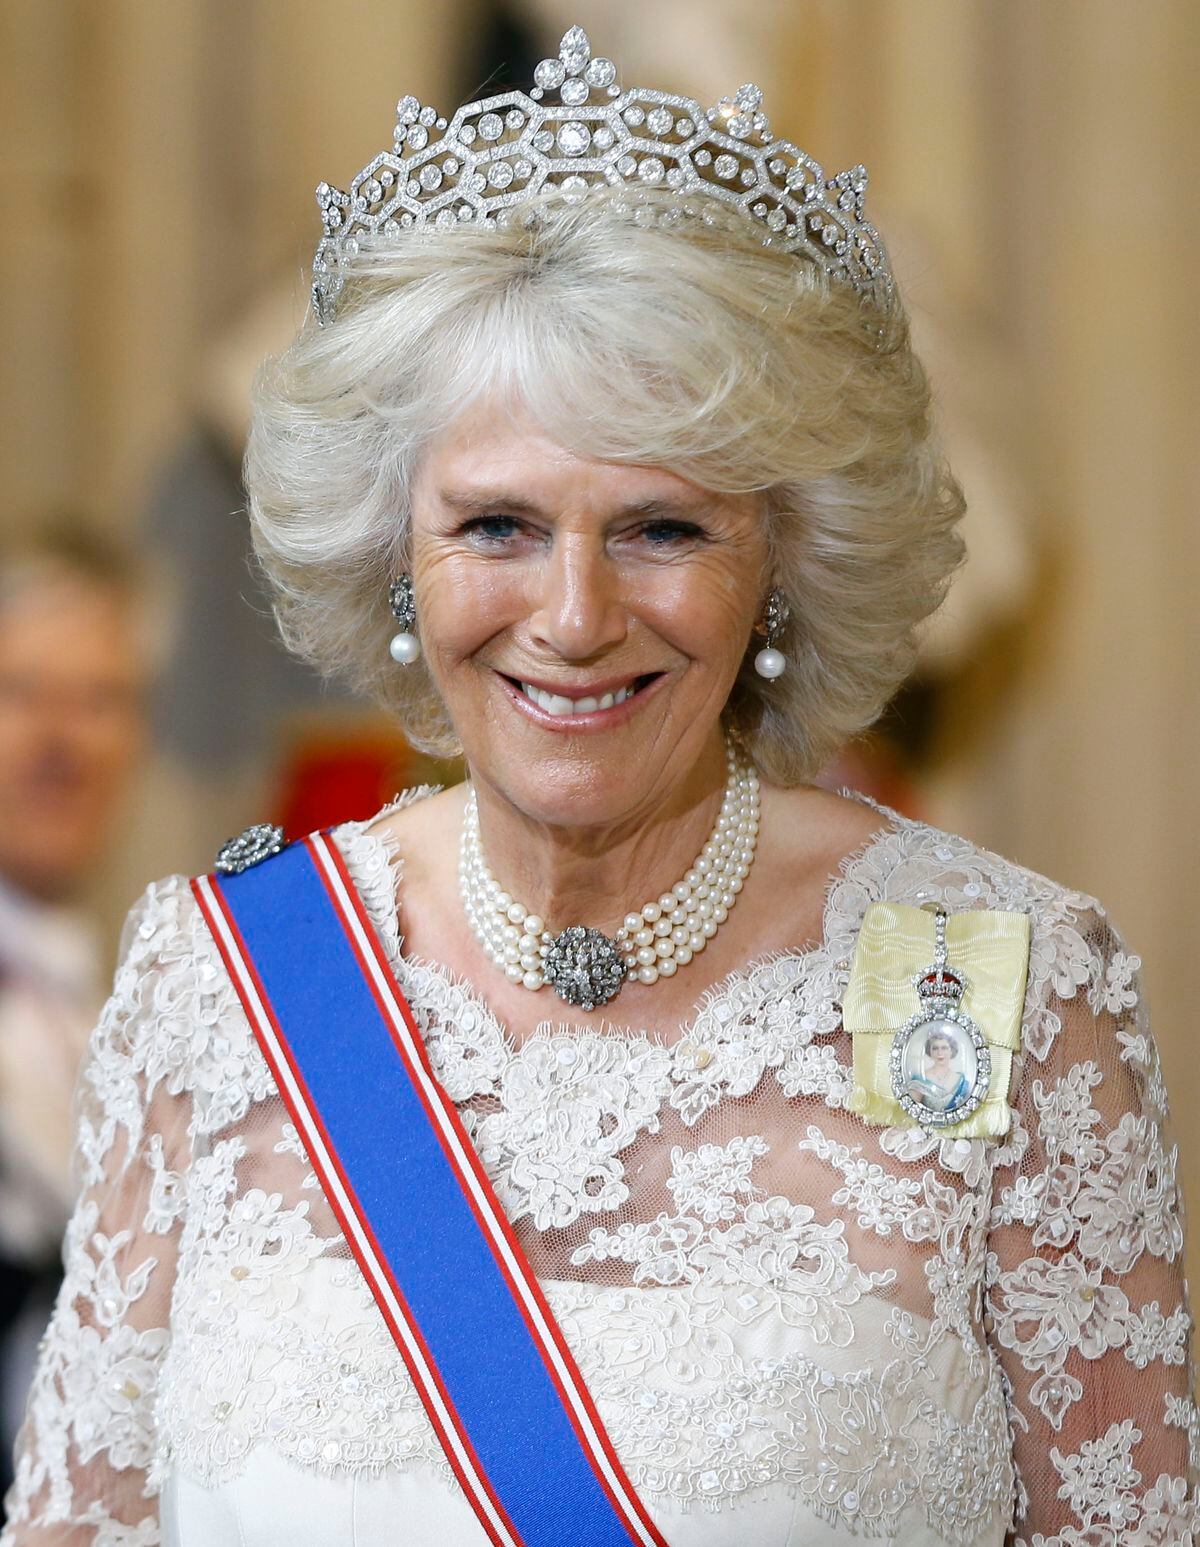 Camilla, seen here leaving the State Opening of Parliament in 2013, has now become Queen Consort. Photo: Kirsty Wigglesworth/PA Wire.